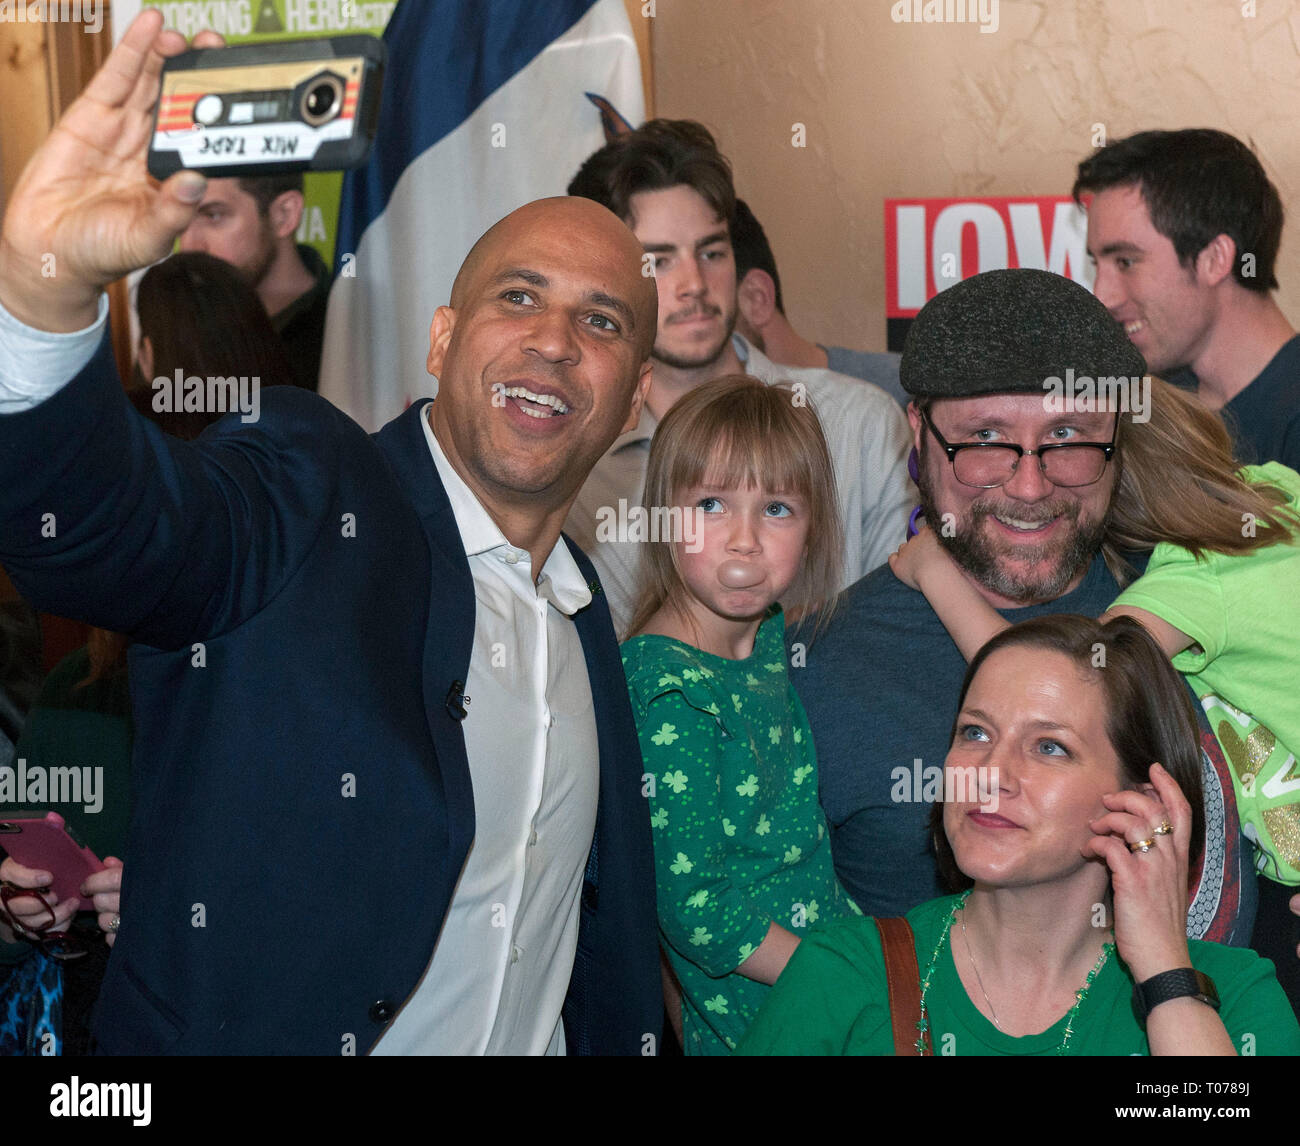 Ames, Iowa, USA. 17th Mar, 2019. Democratic presidential candidate, U.S. Senator CORY BOOKER (D-NJ), takes a selfie with supporters who came to 'A Conversation with Cory' meet and greet with Iowa voters at the Prairie Moon Winery. Credit: Brian Cahn/ZUMA Wire/Alamy Live News Stock Photo